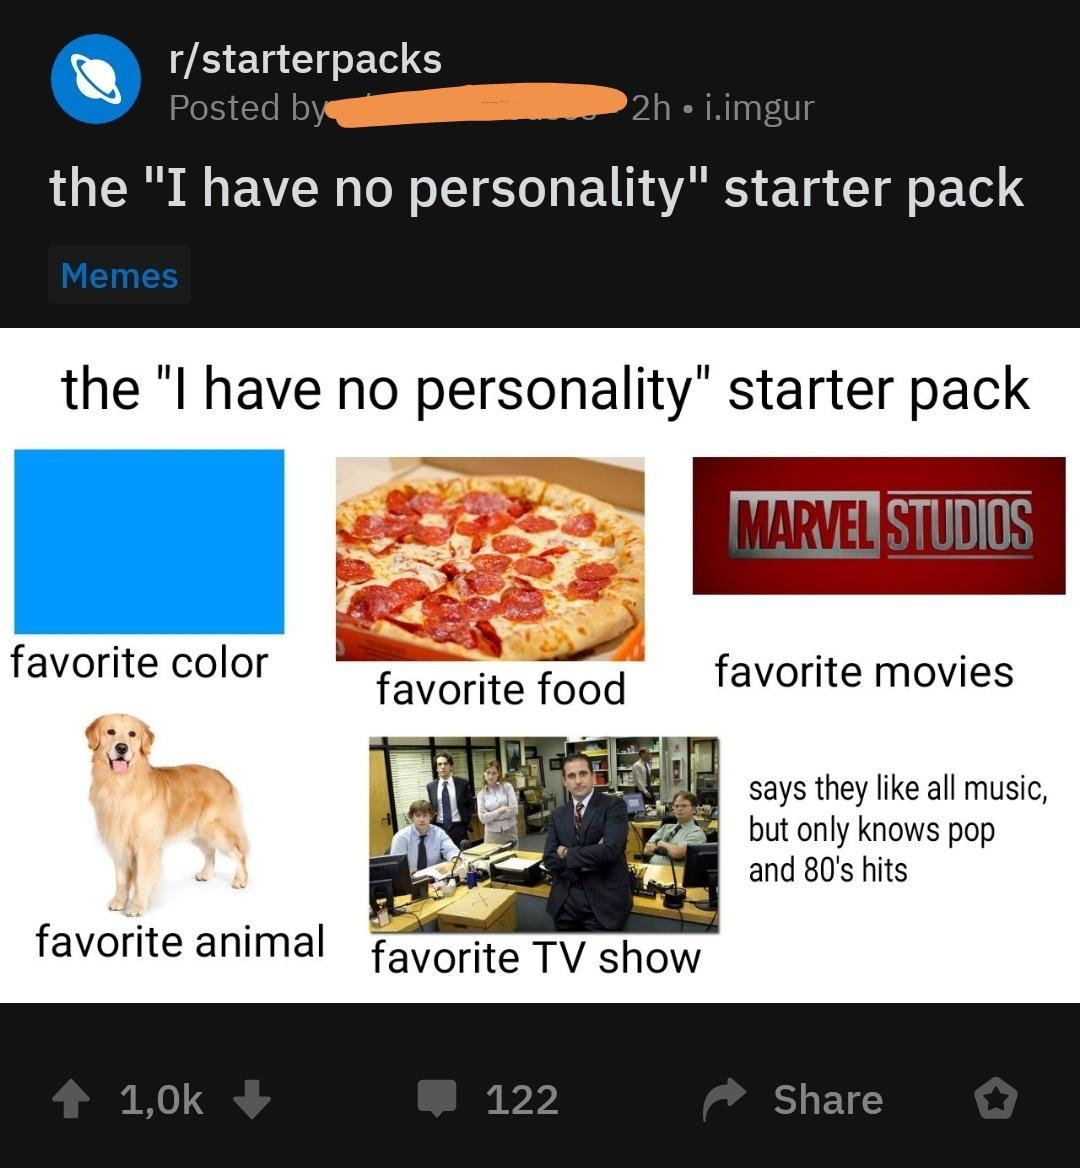 the &quot;I have no personality starter pack&quot; that includes pizza, a dog, marvel movies and The Office as their favorite show